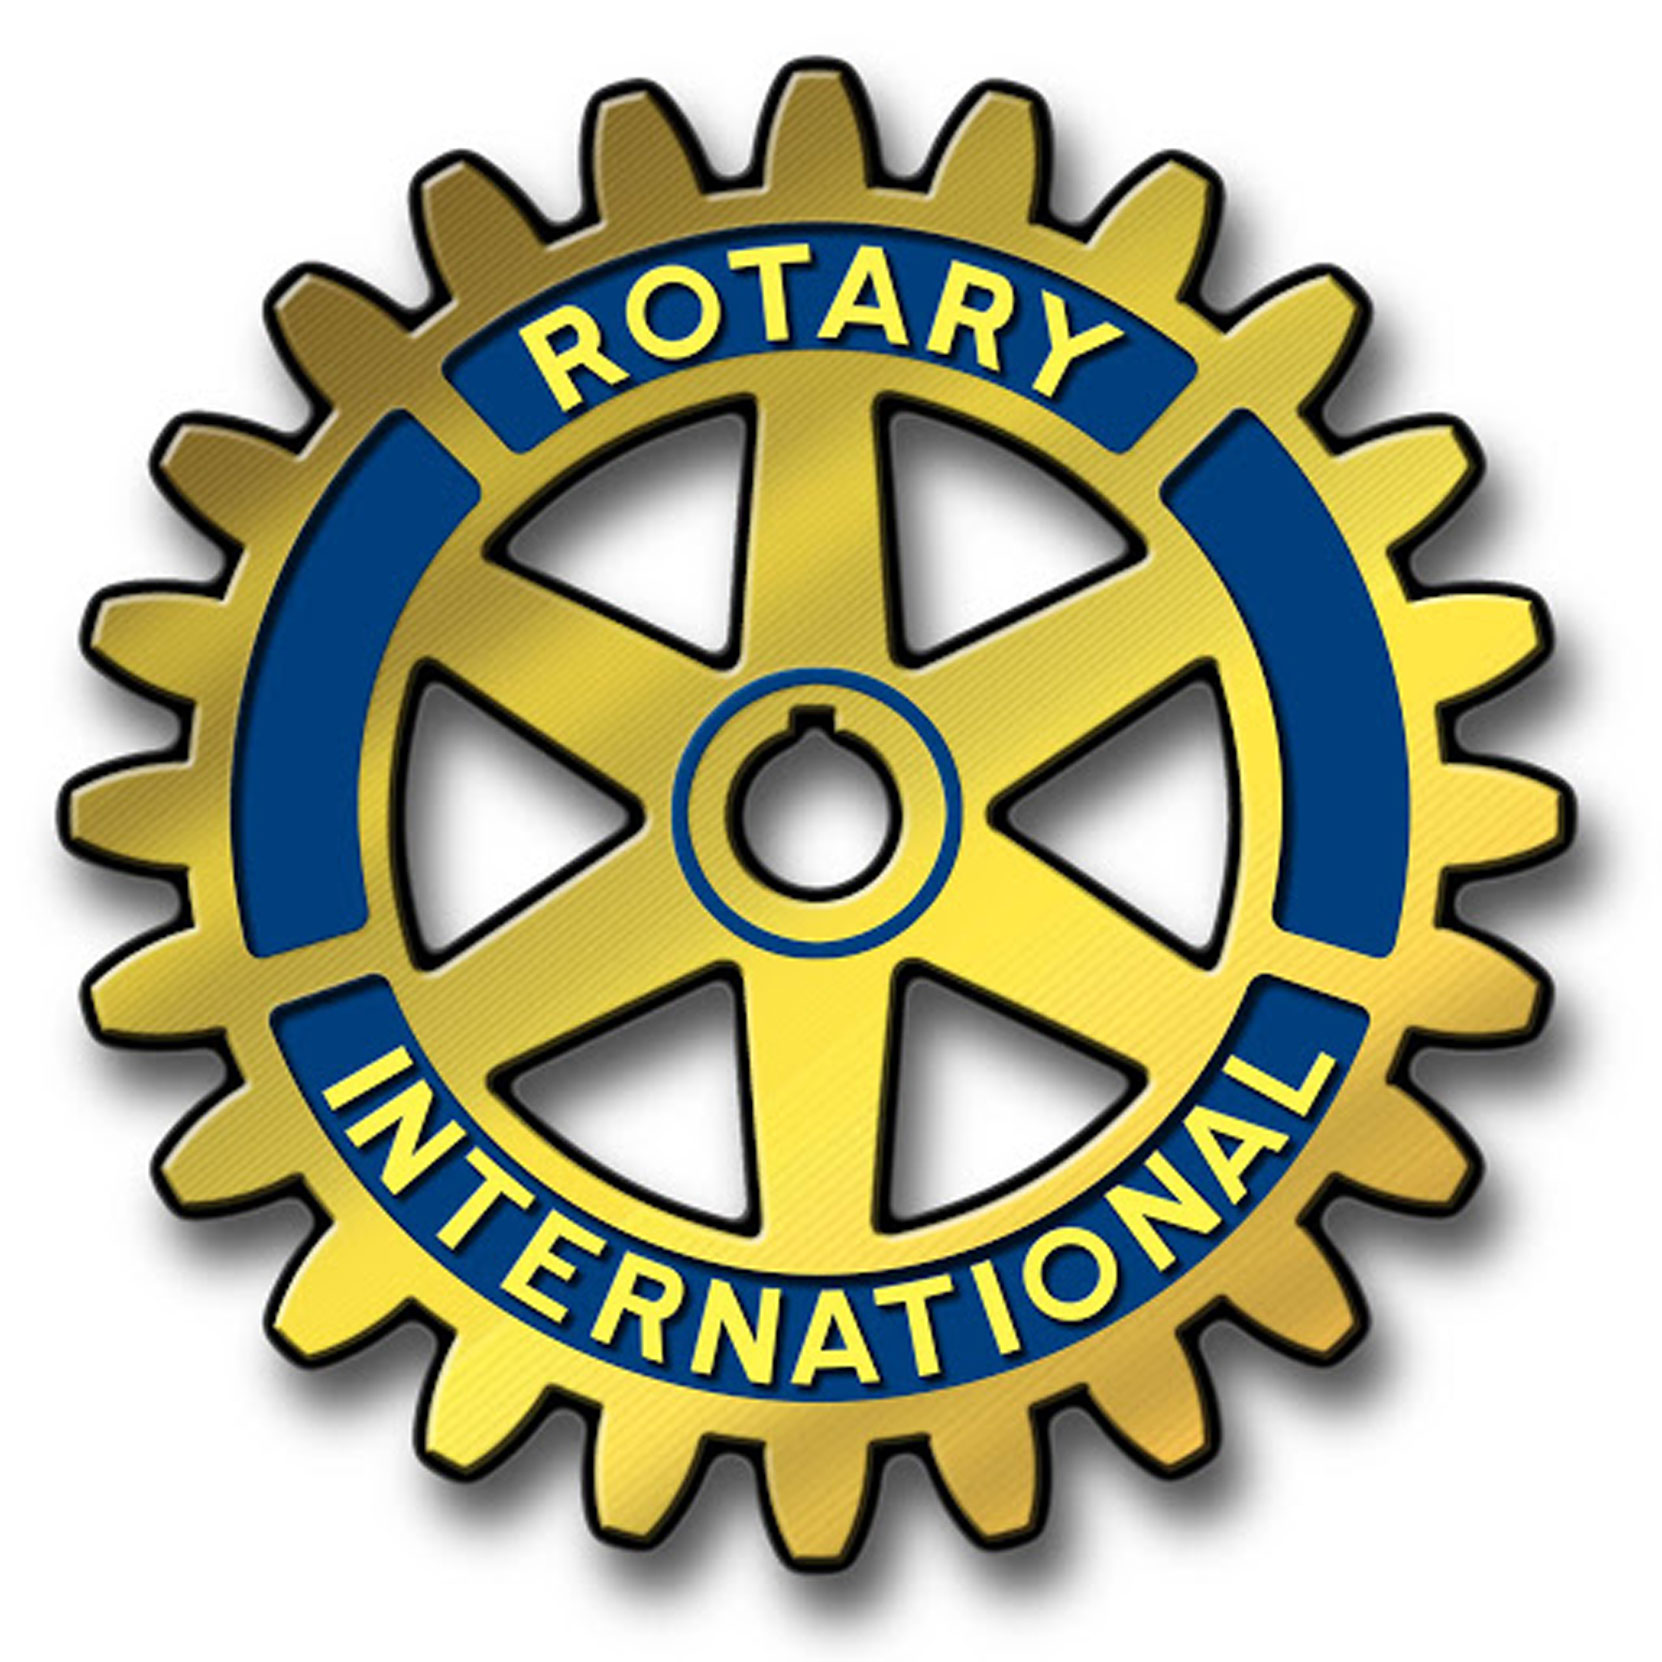 West Coast Driver Training & Education Inc. is a member of the Rotary Club of Duncan.